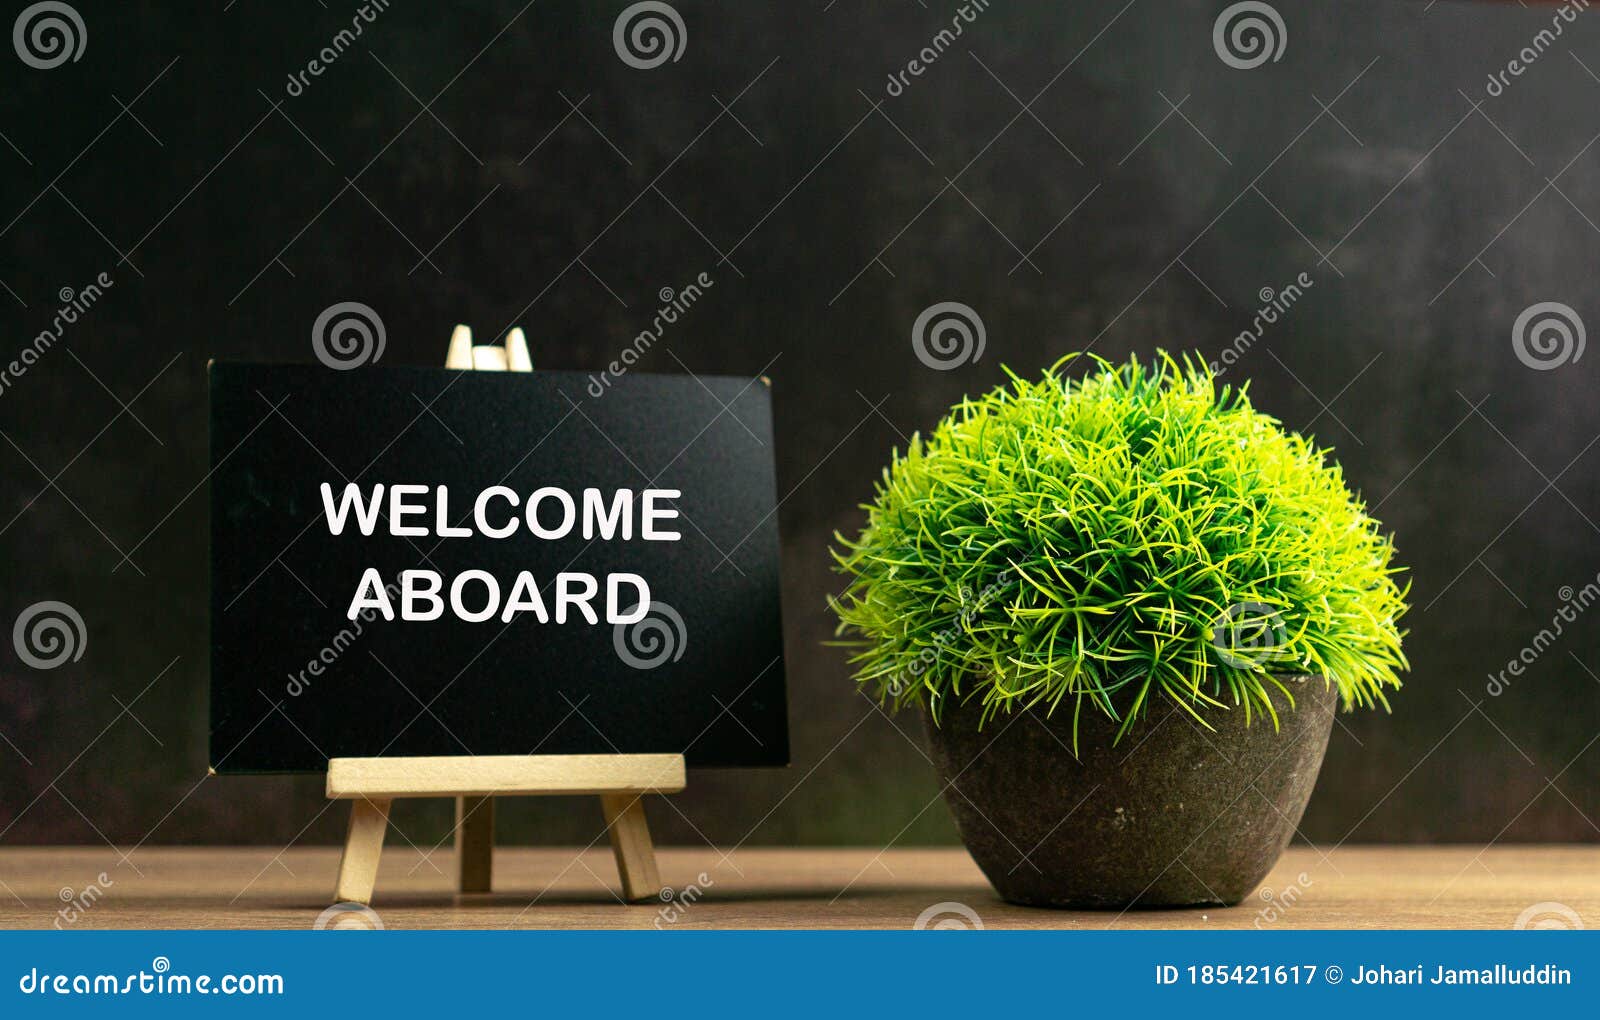 welcome aboard wrote on chalkboard with green plant in pot